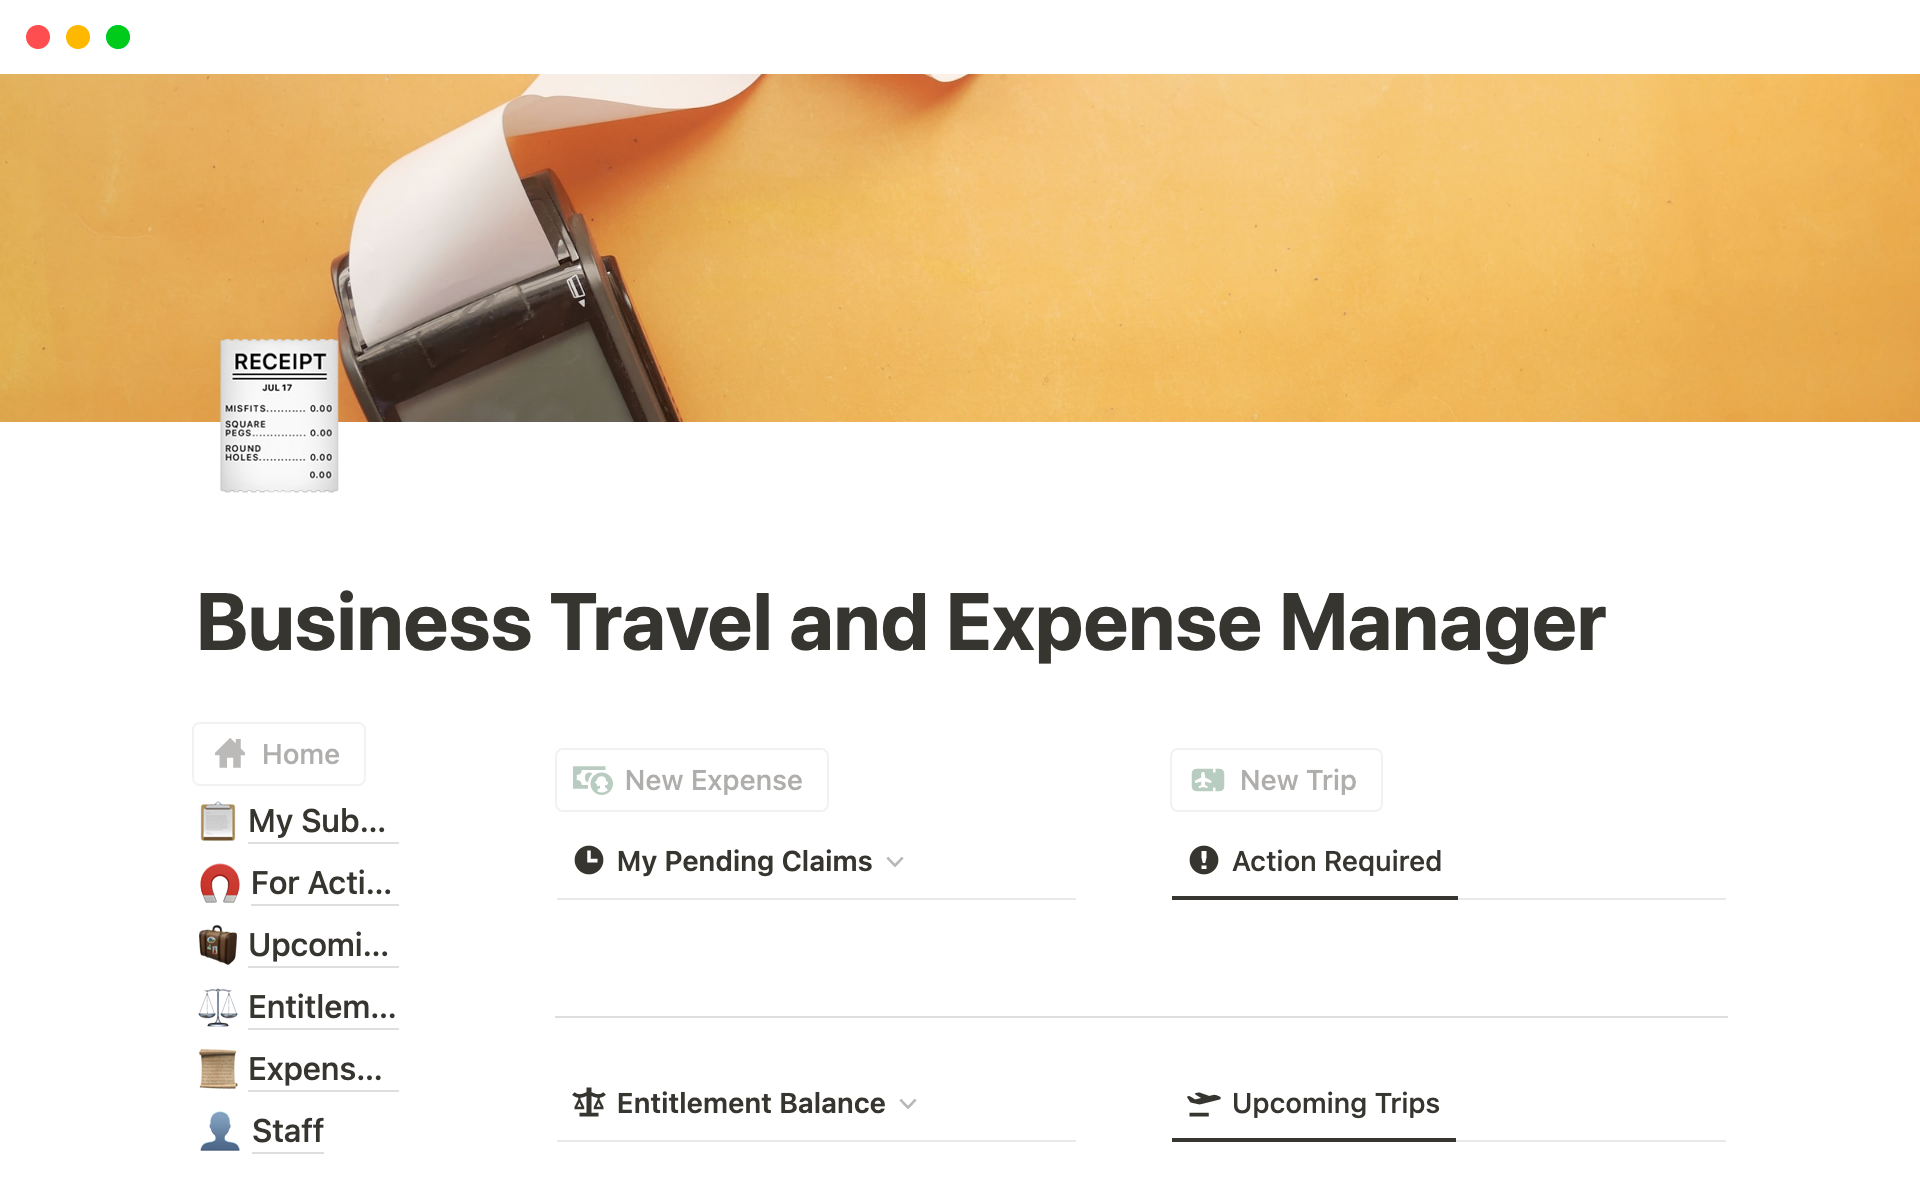 Mallin esikatselu nimelle Business Travel and Expense Manager